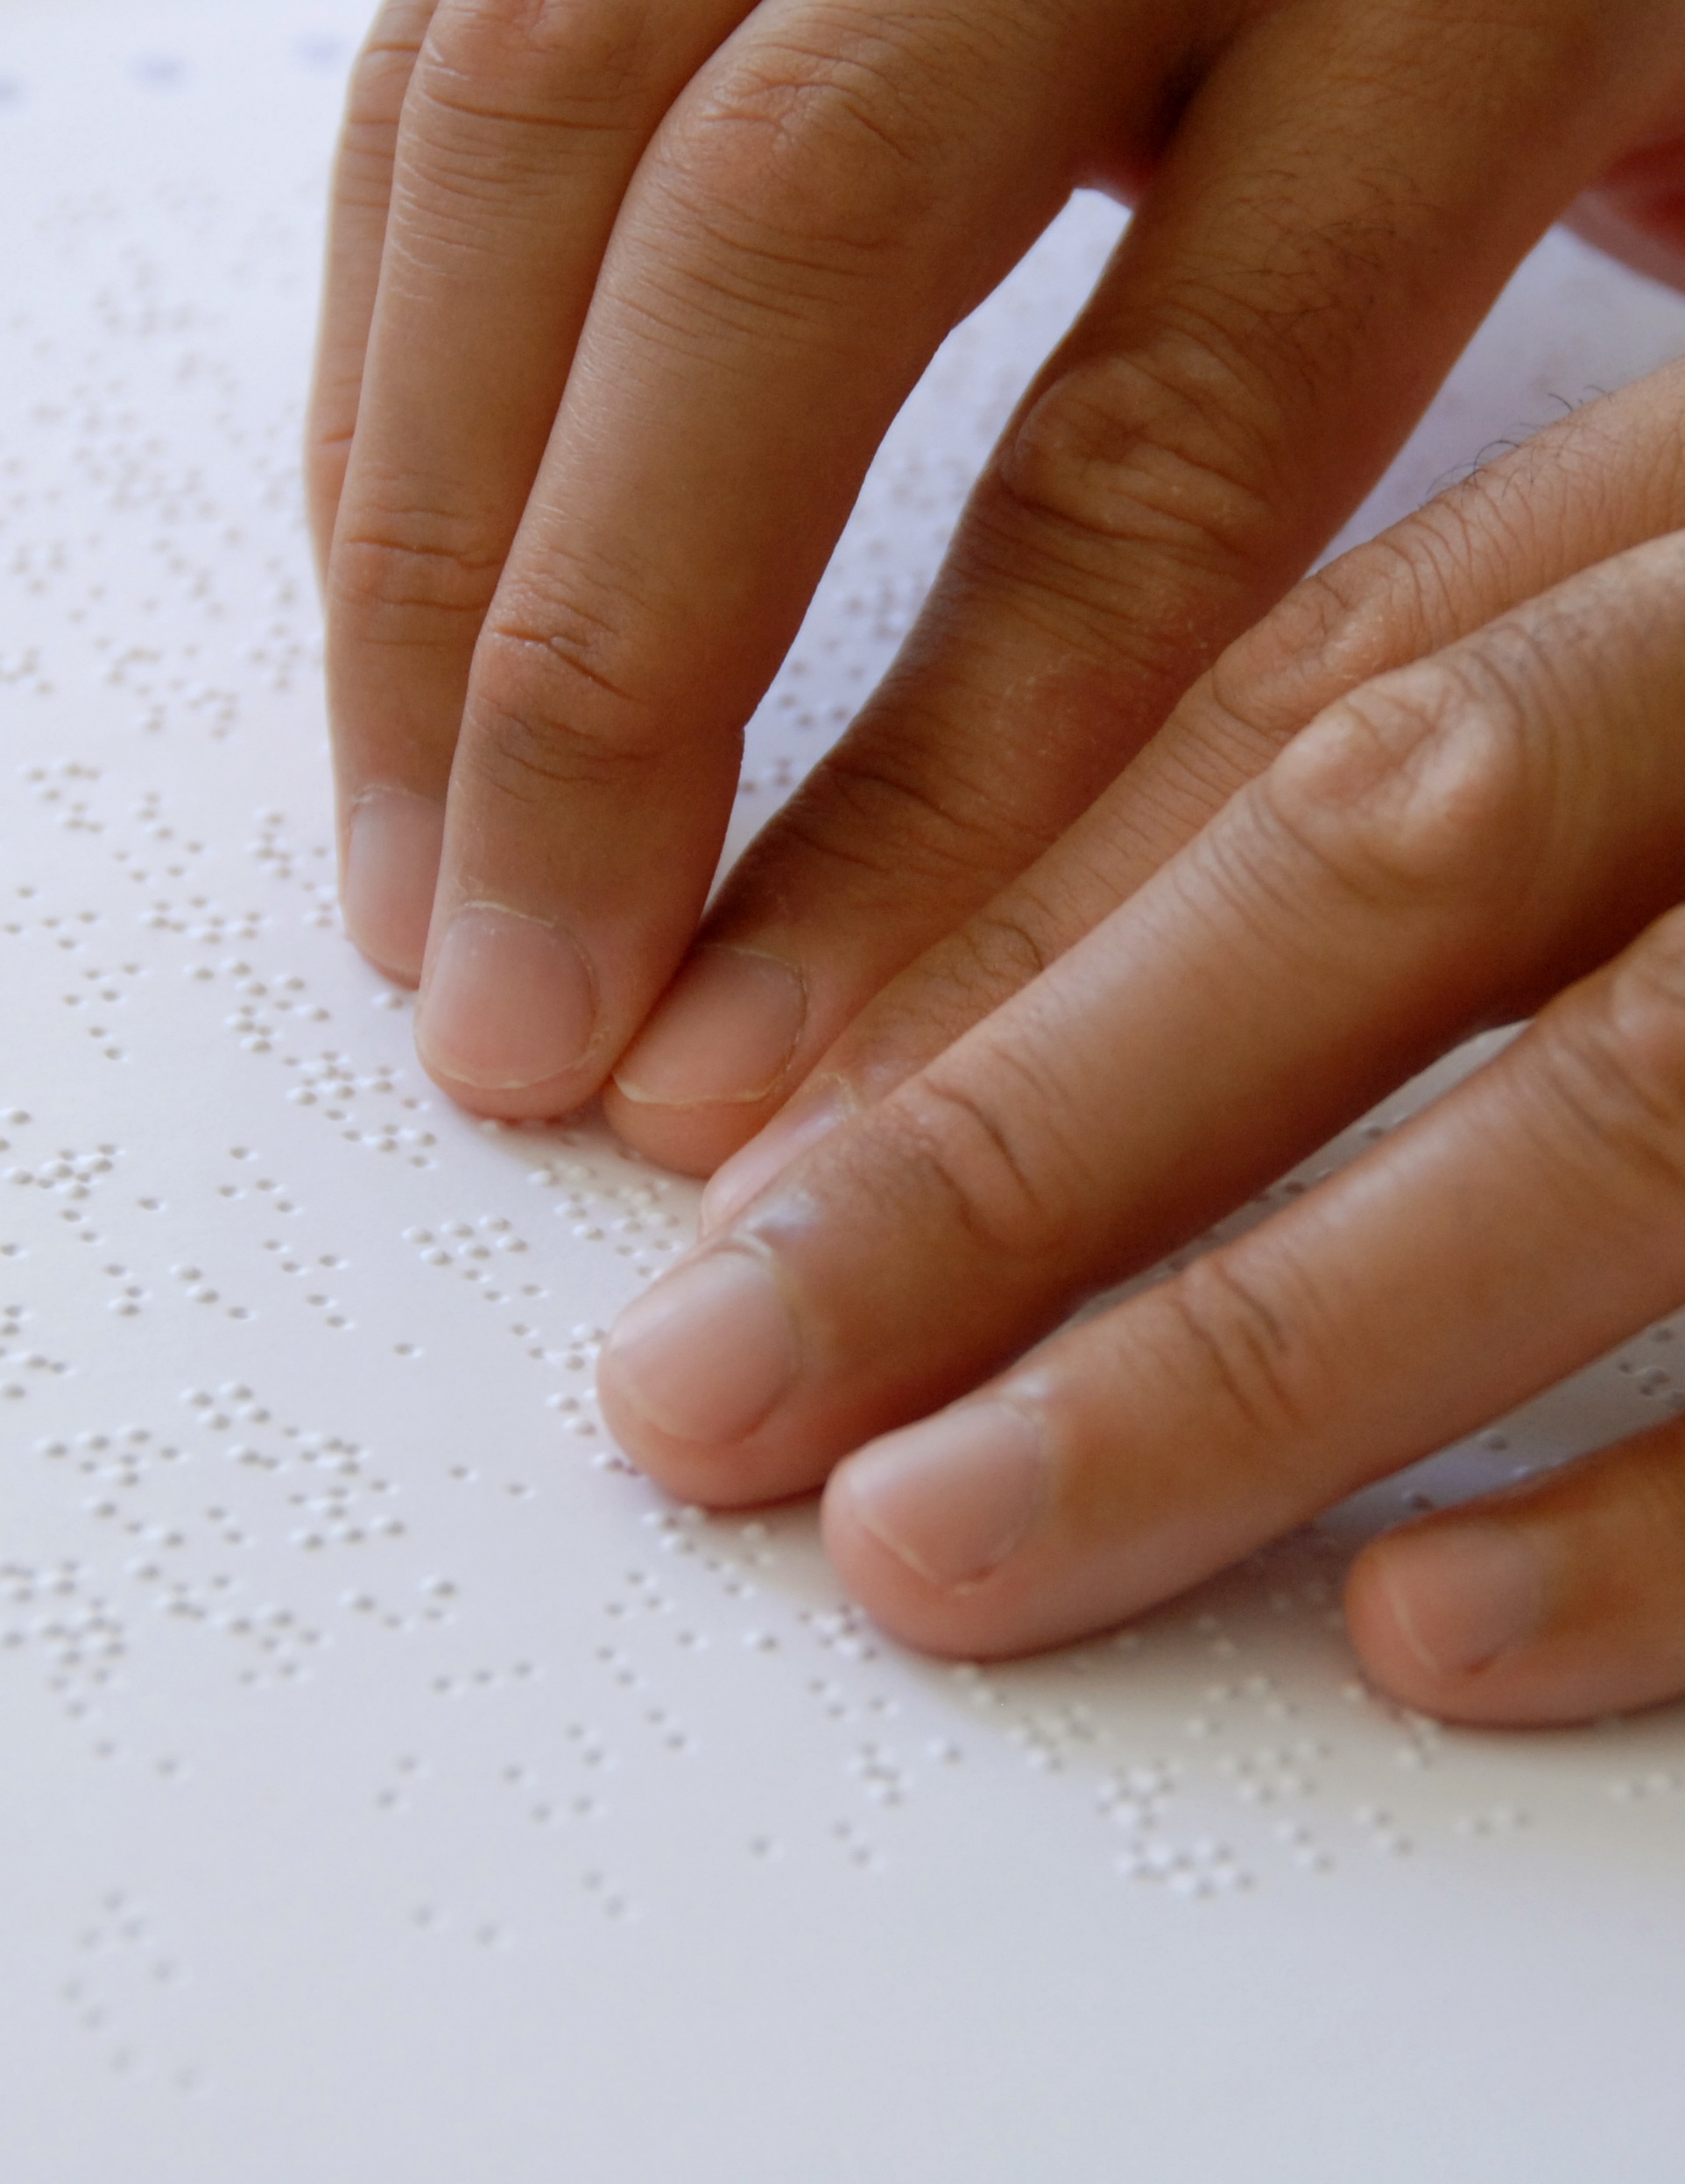 Photograph: two hands reading Braille